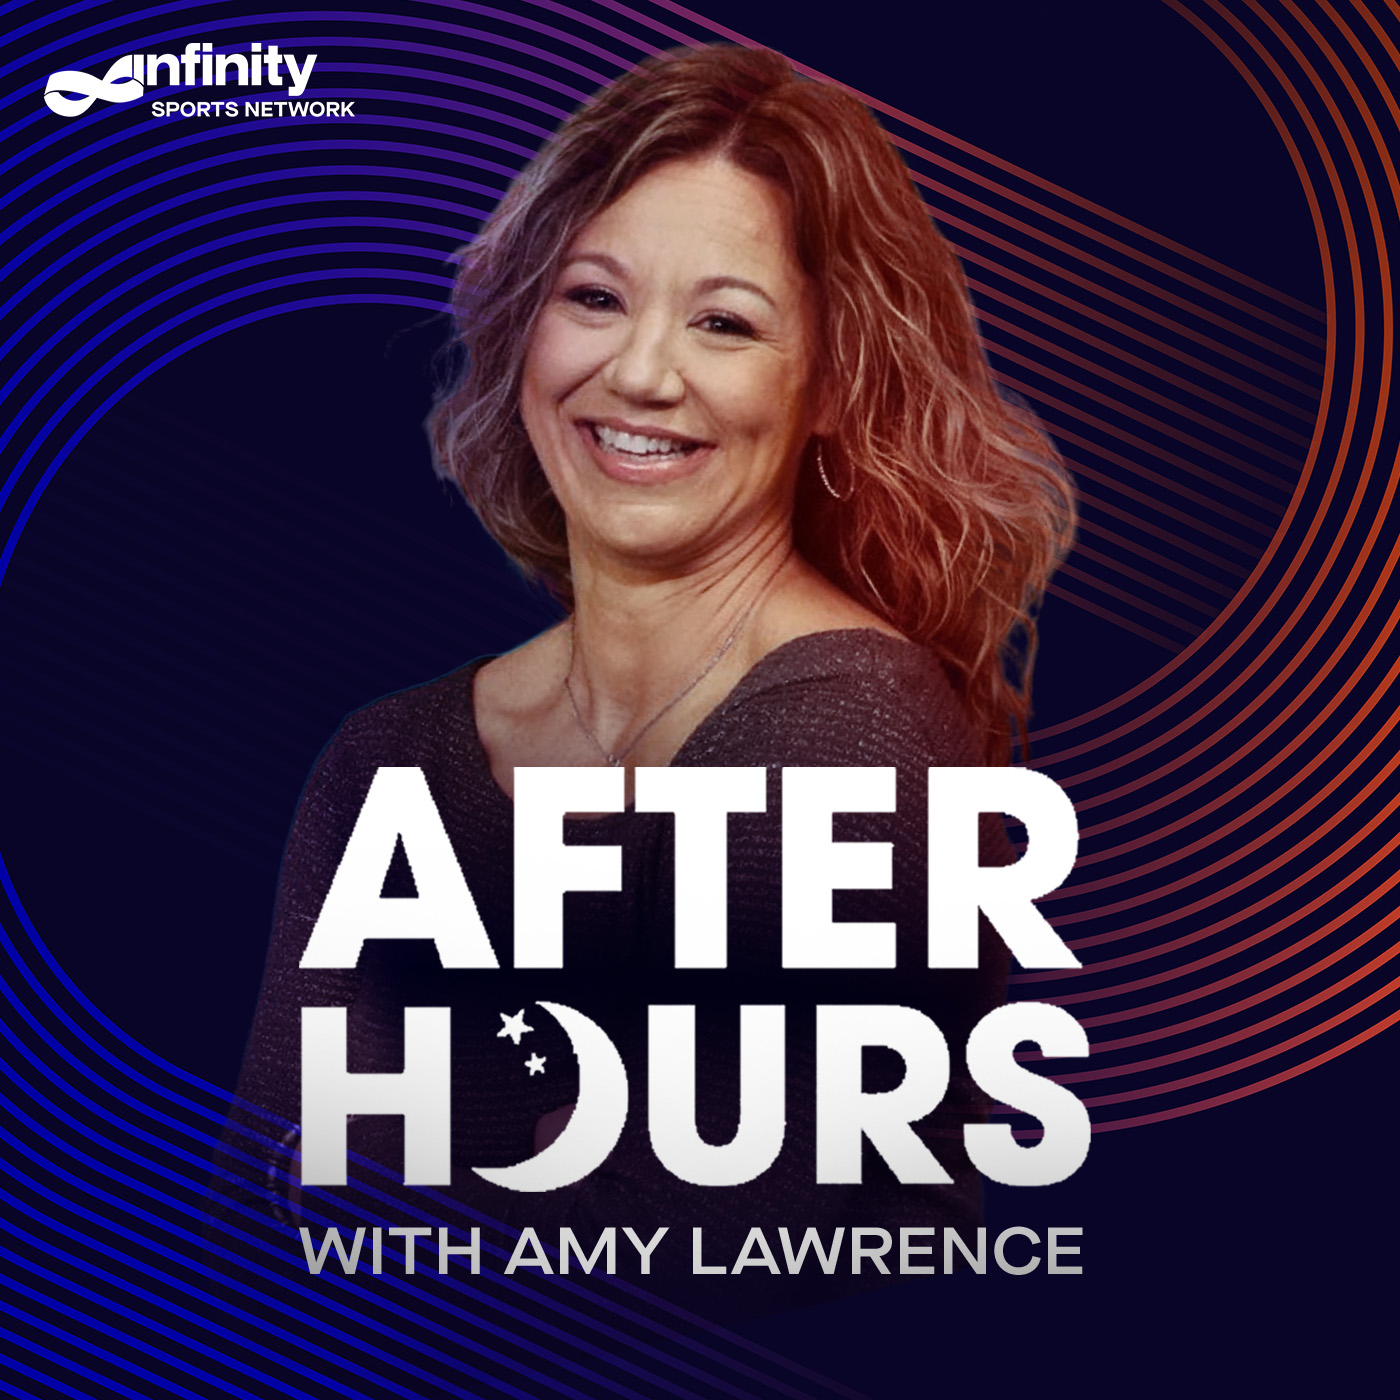 9-6-21 After Hours with Amy Lawrence PODCAST: Hour 2